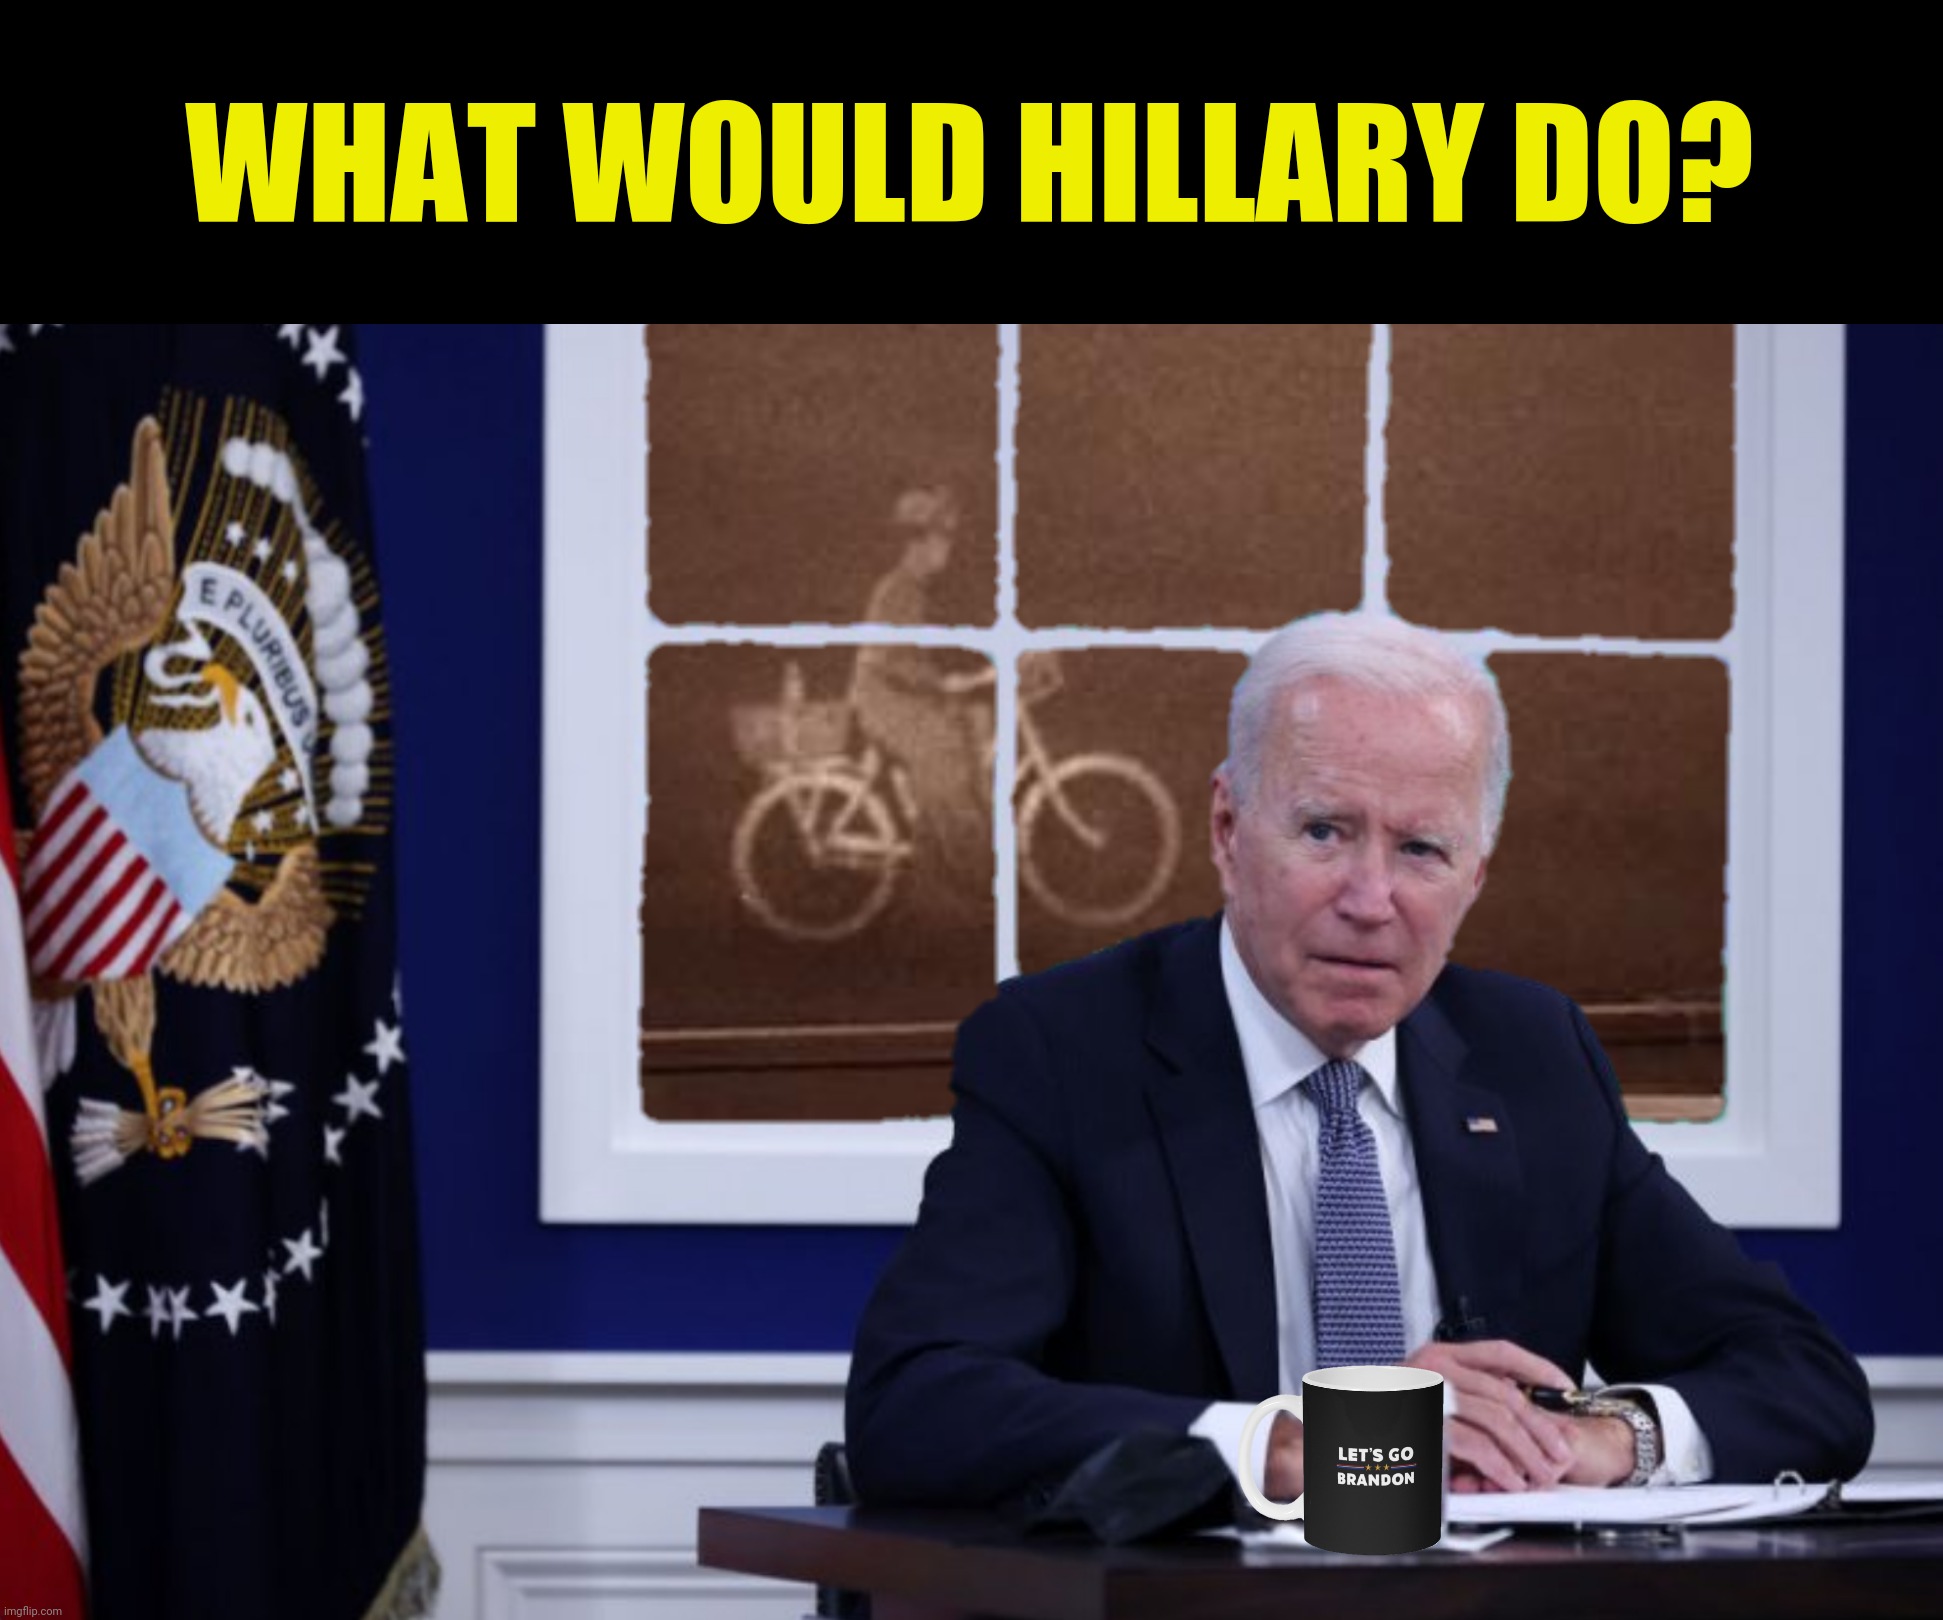 WHAT WOULD HILLARY DO? | made w/ Imgflip meme maker